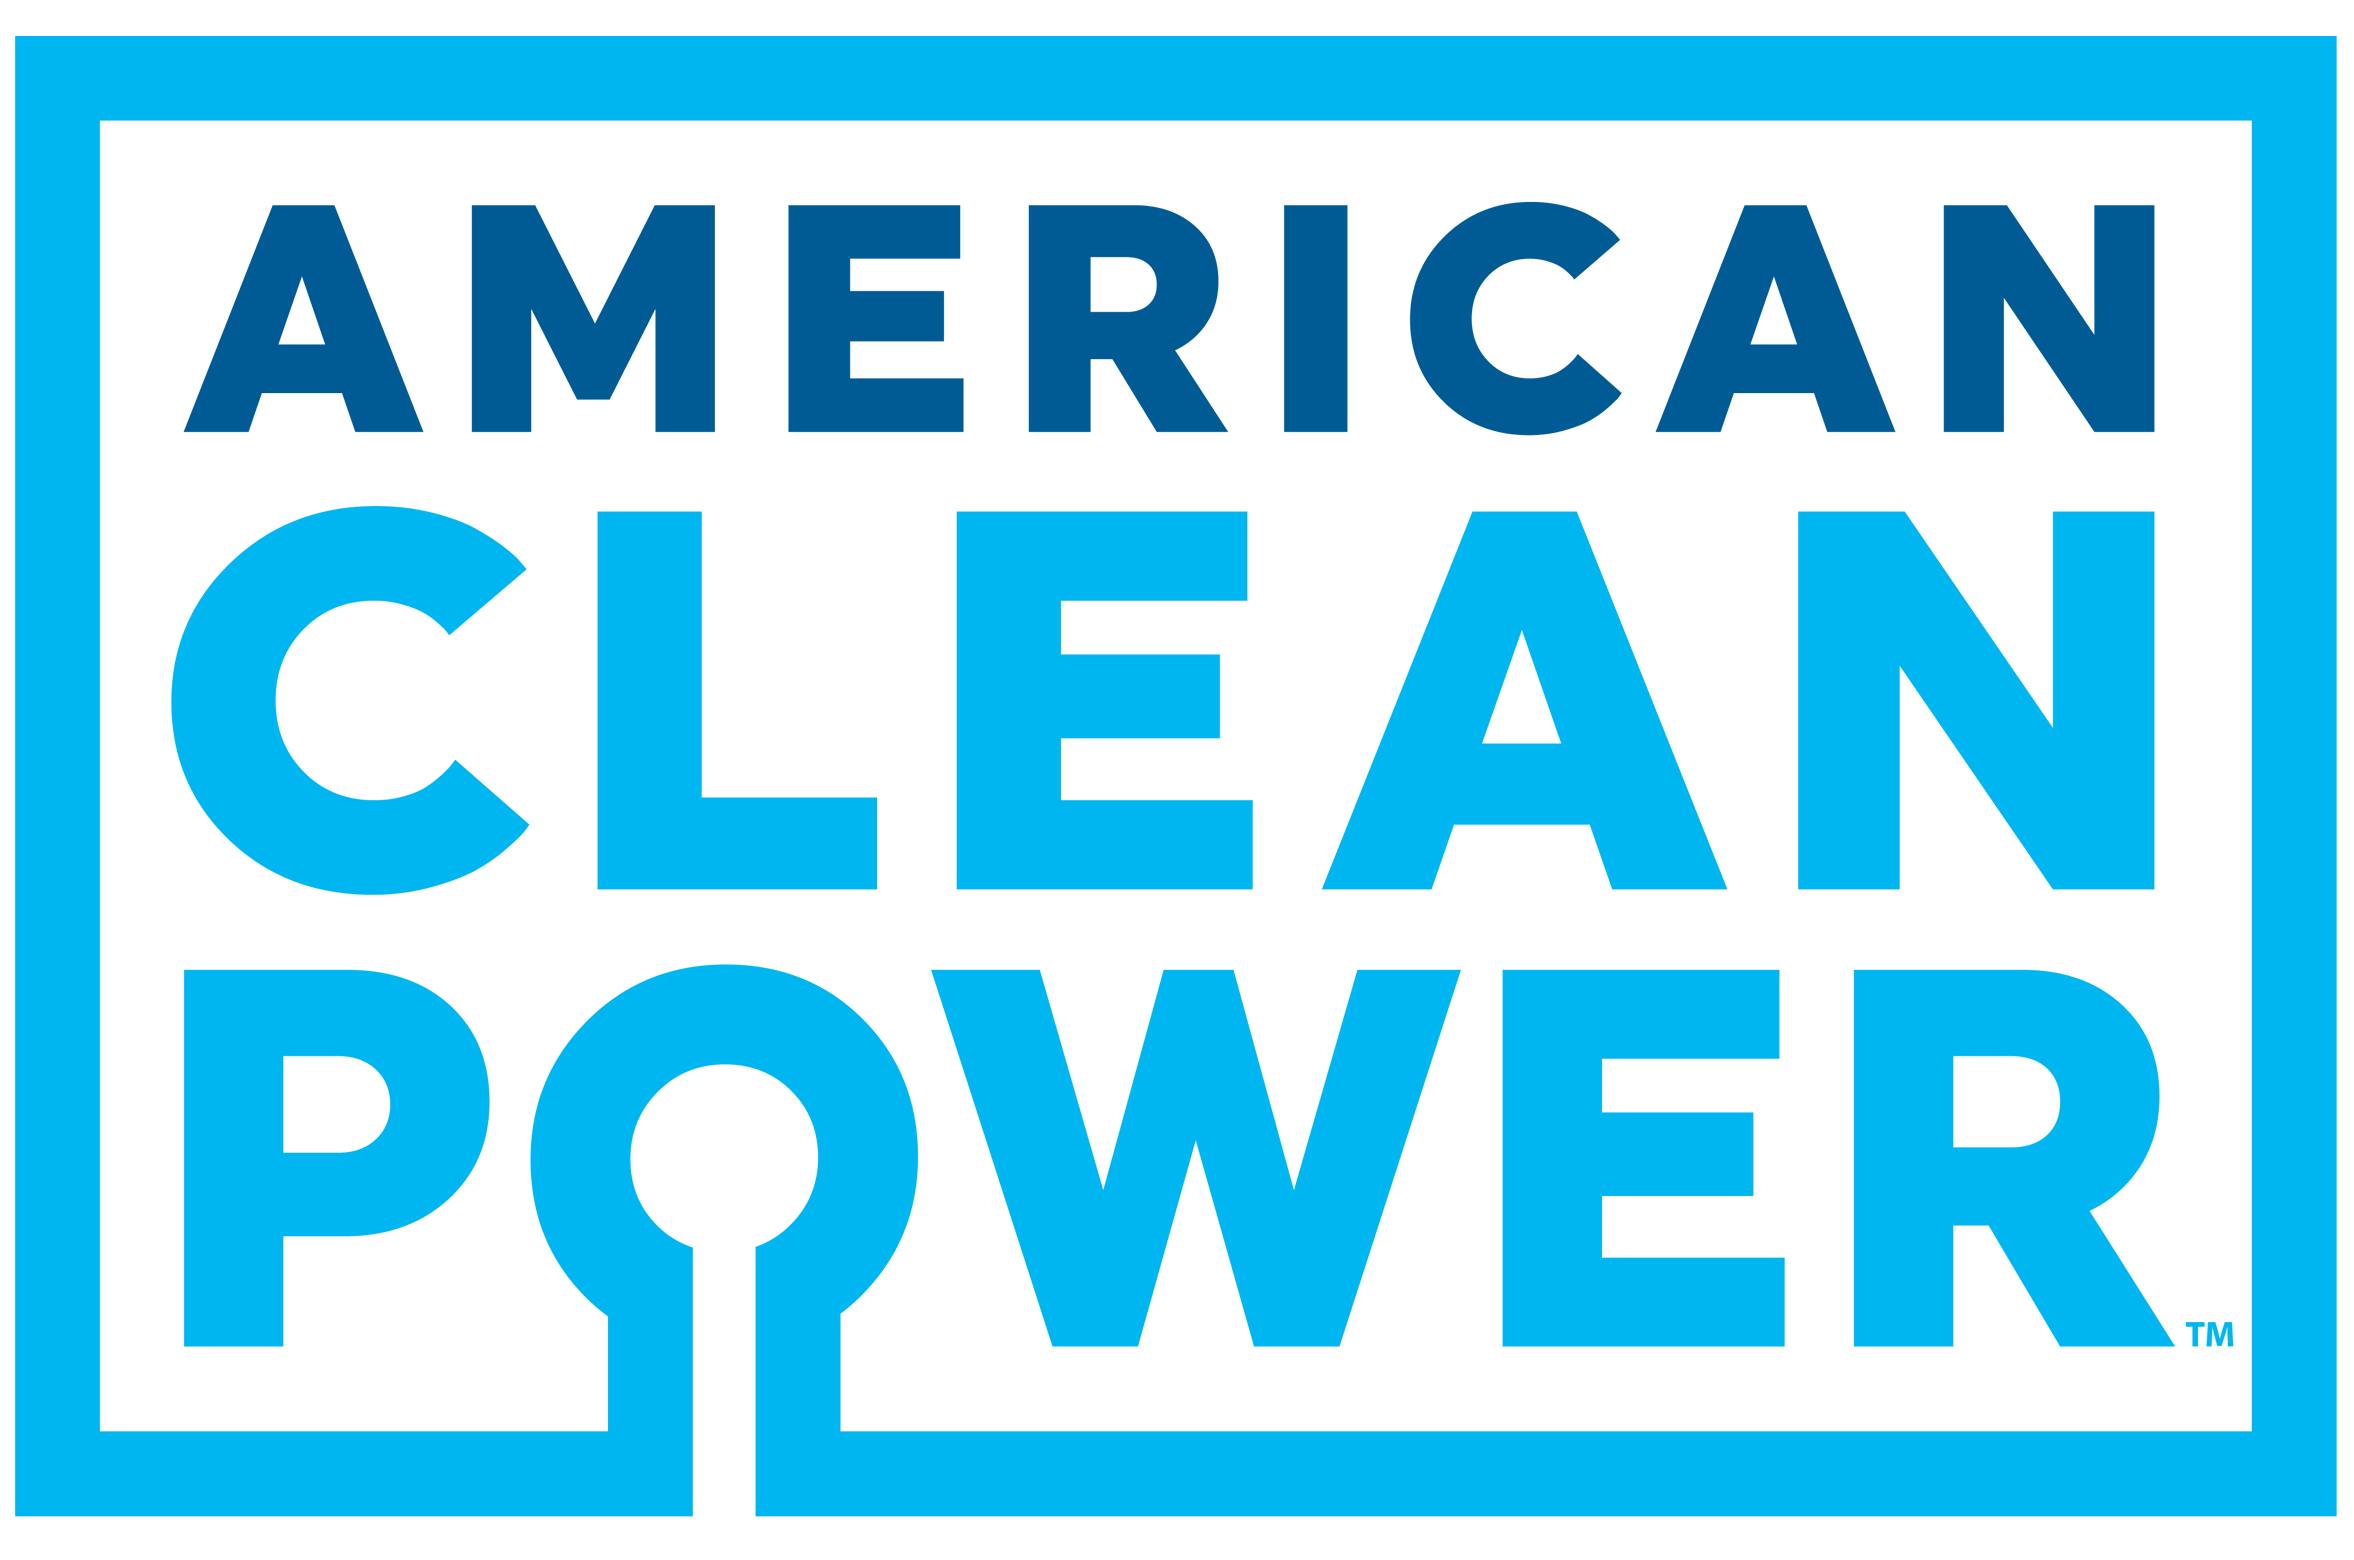 CLEANPOWER Conference & Exhibition